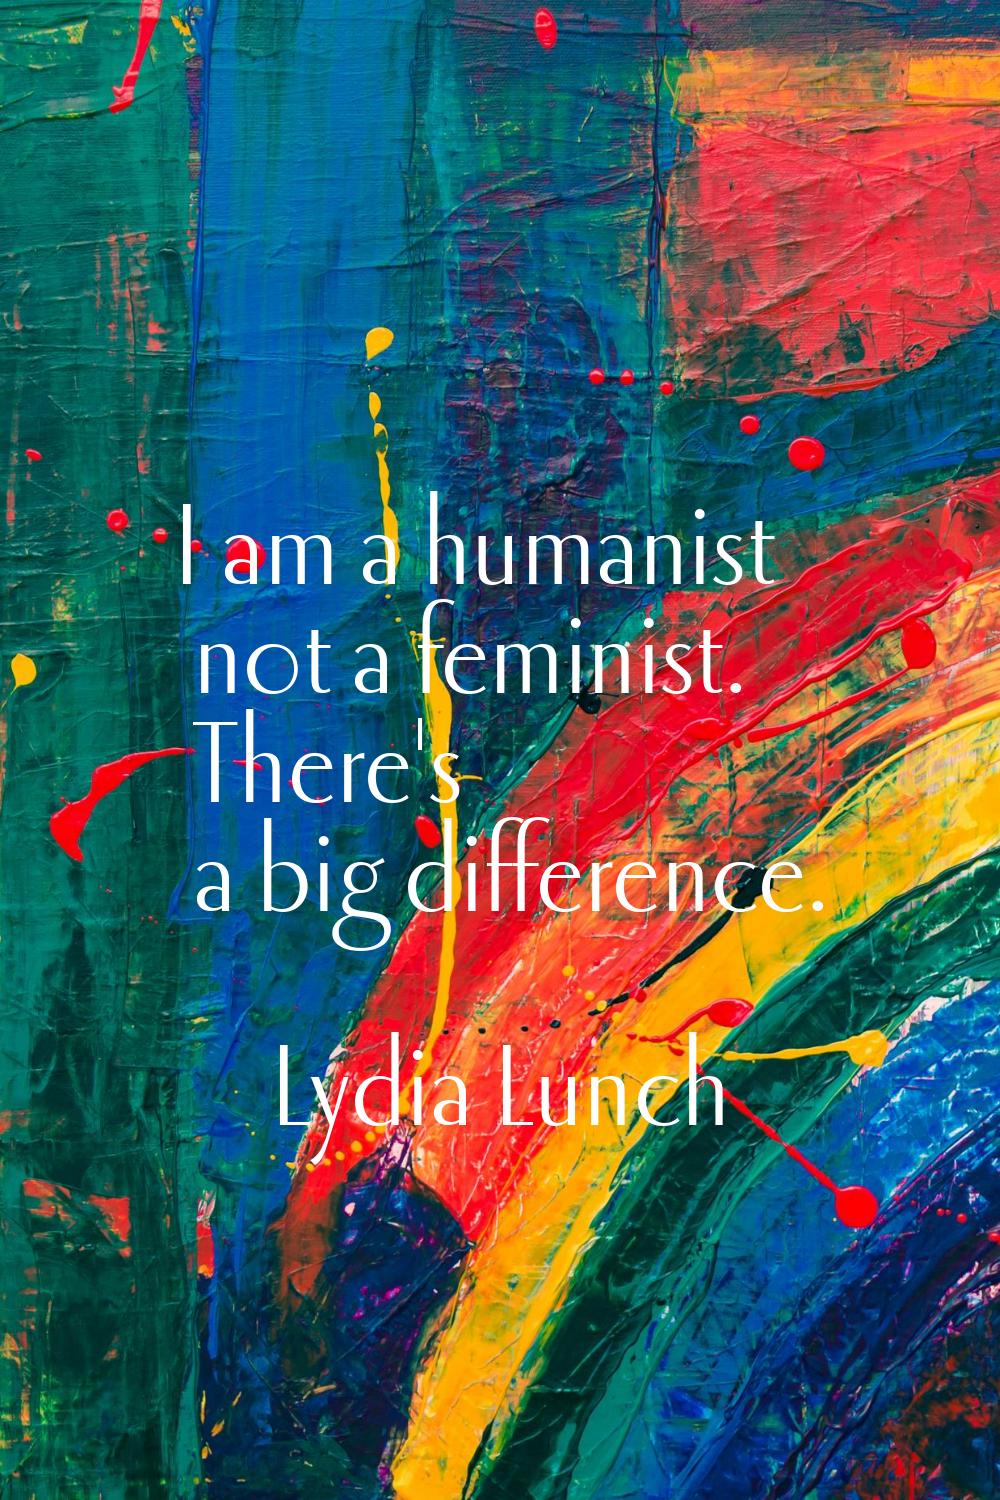 I am a humanist not a feminist. There's a big difference.